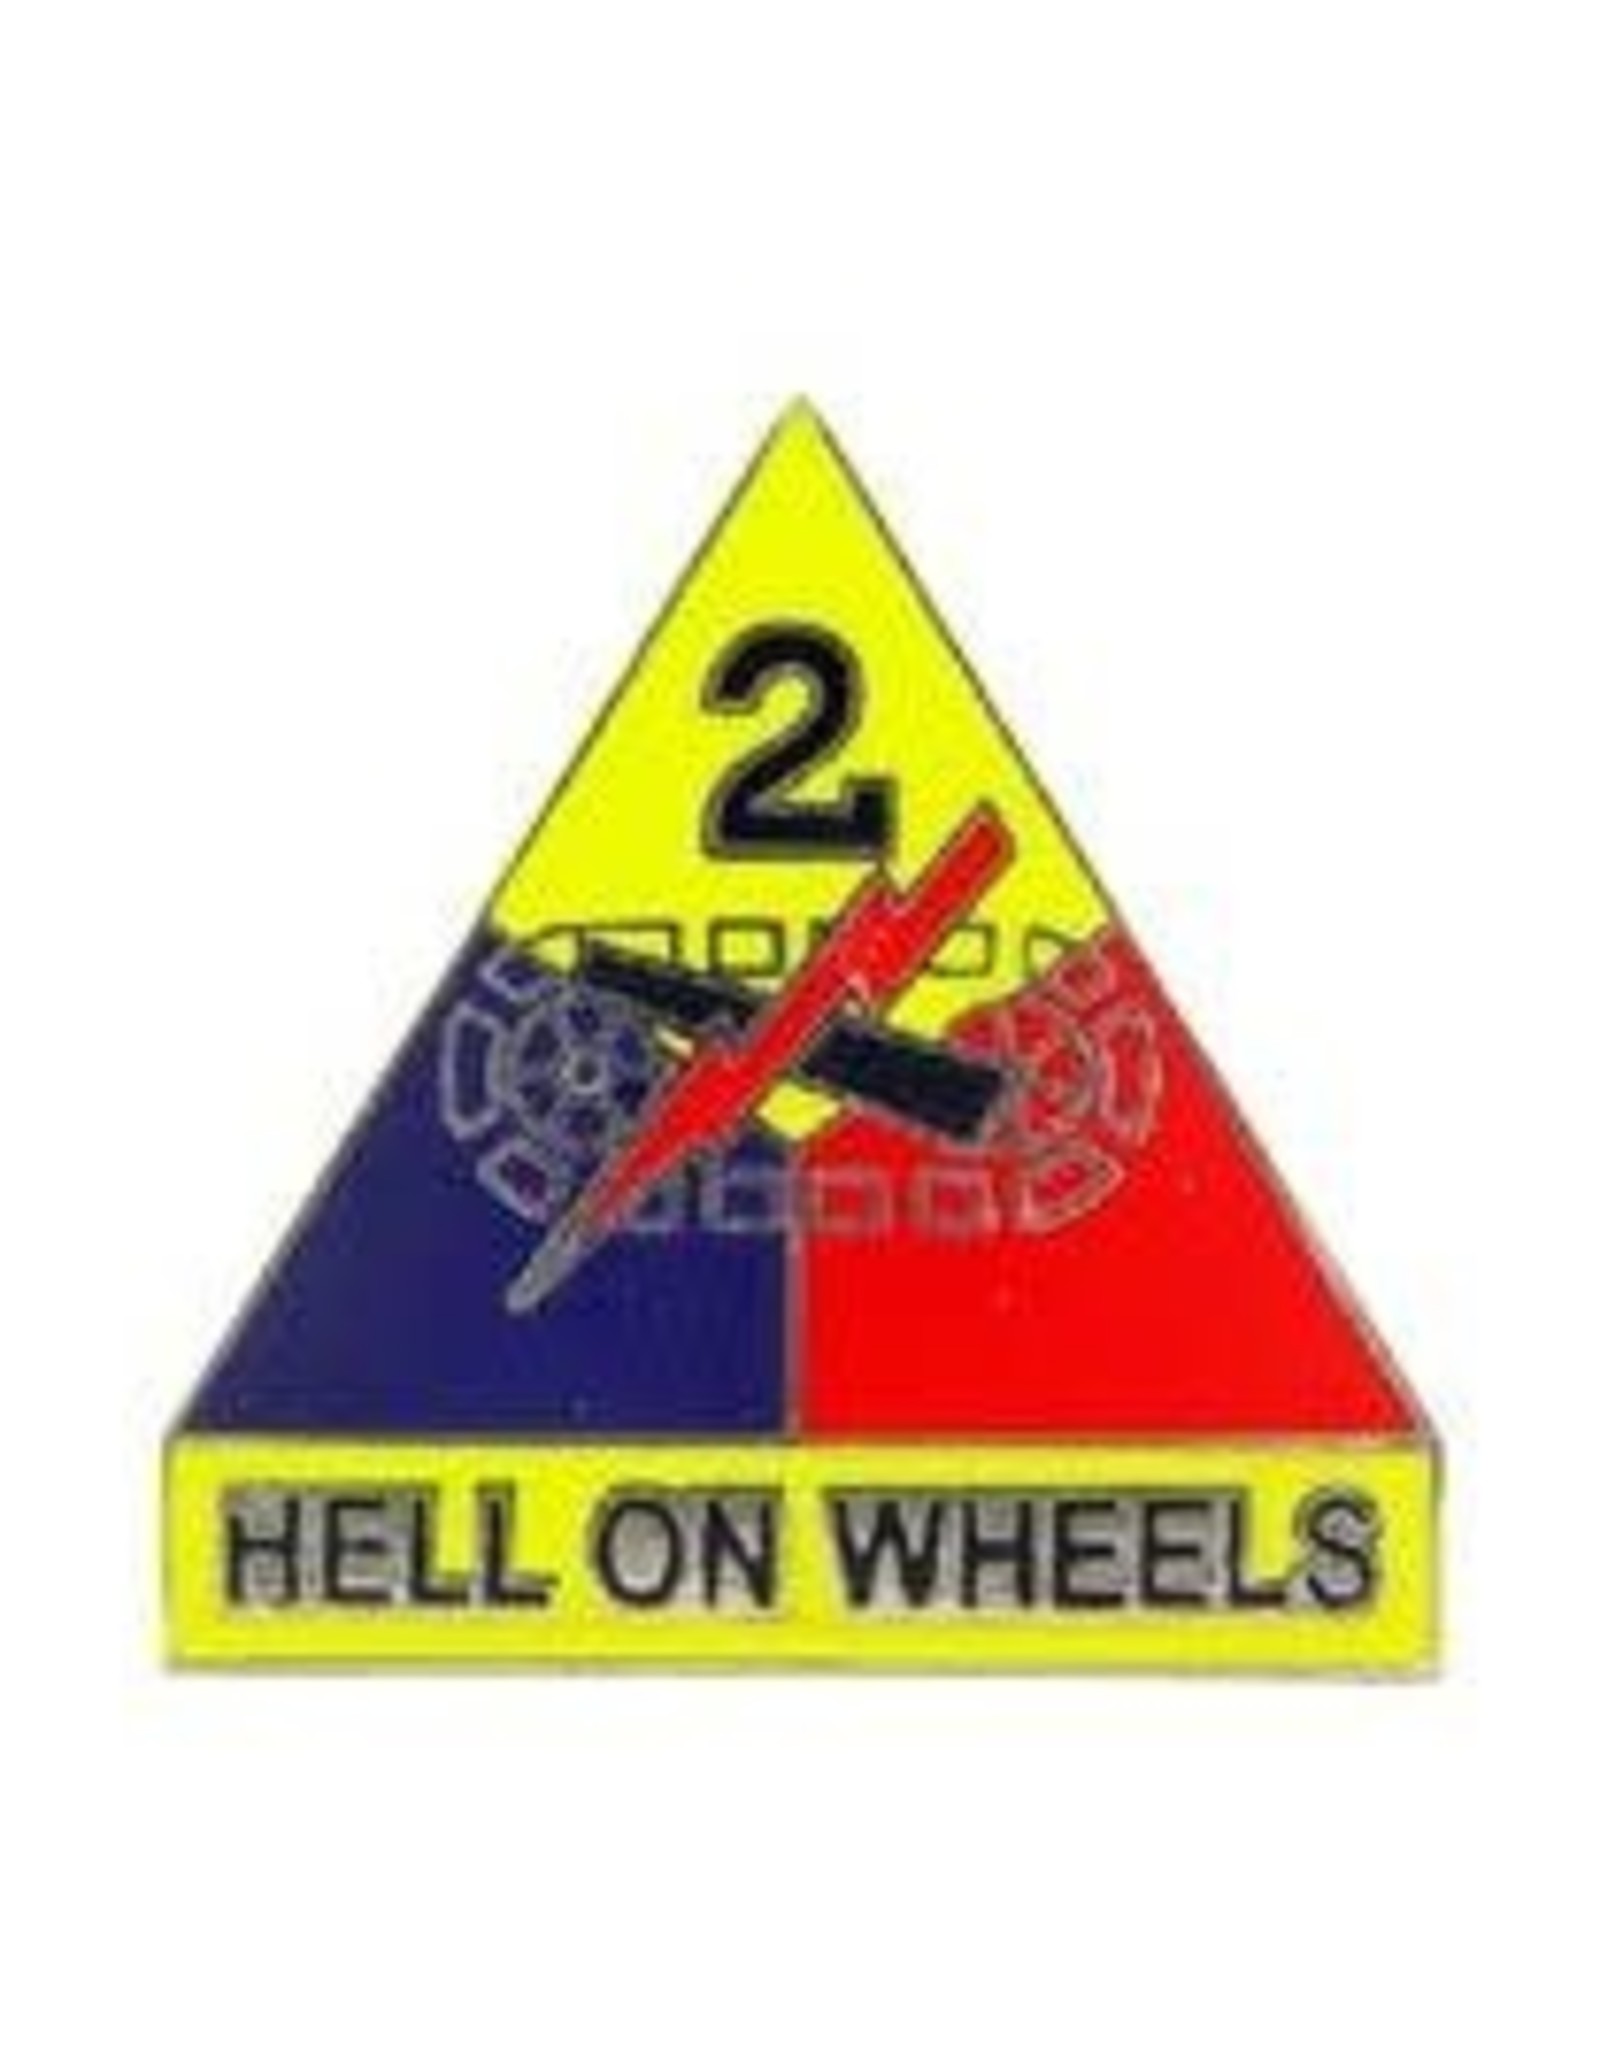 Pin - Army 2nd Armored Division Hell On Wheels